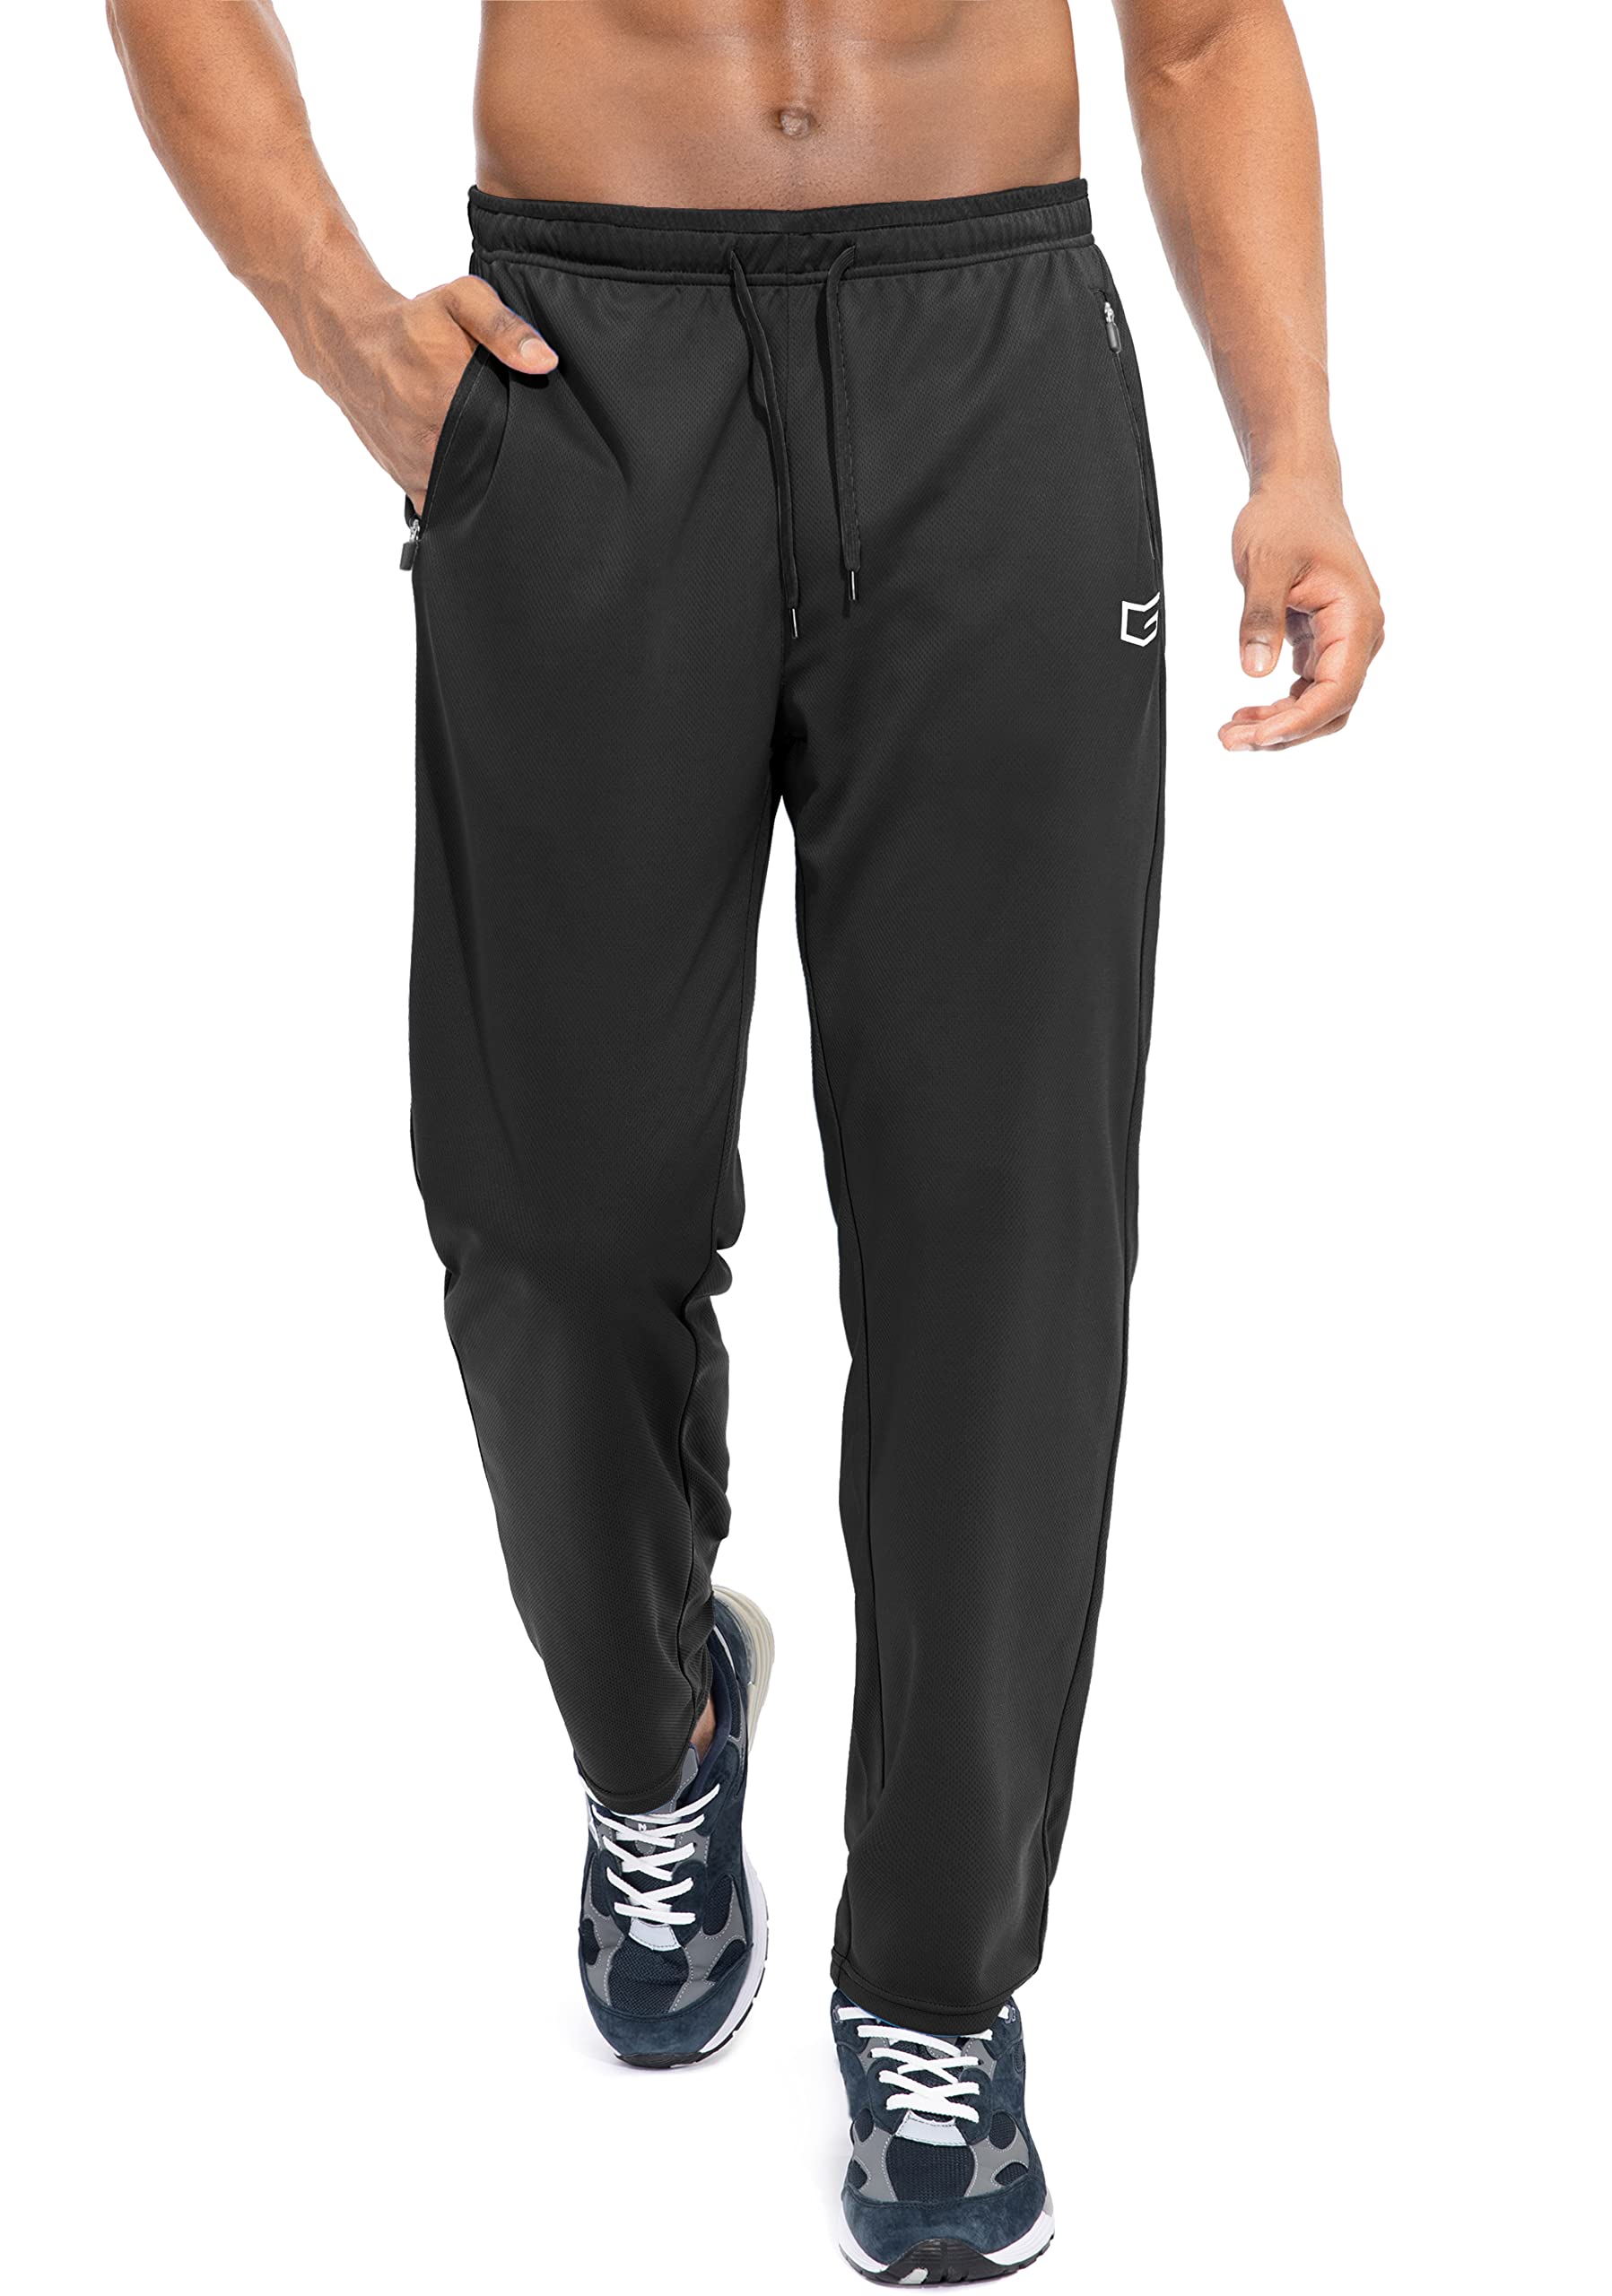 THE GYM PEOPLE Men's Fleece Joggers Pants with Deep Pockets